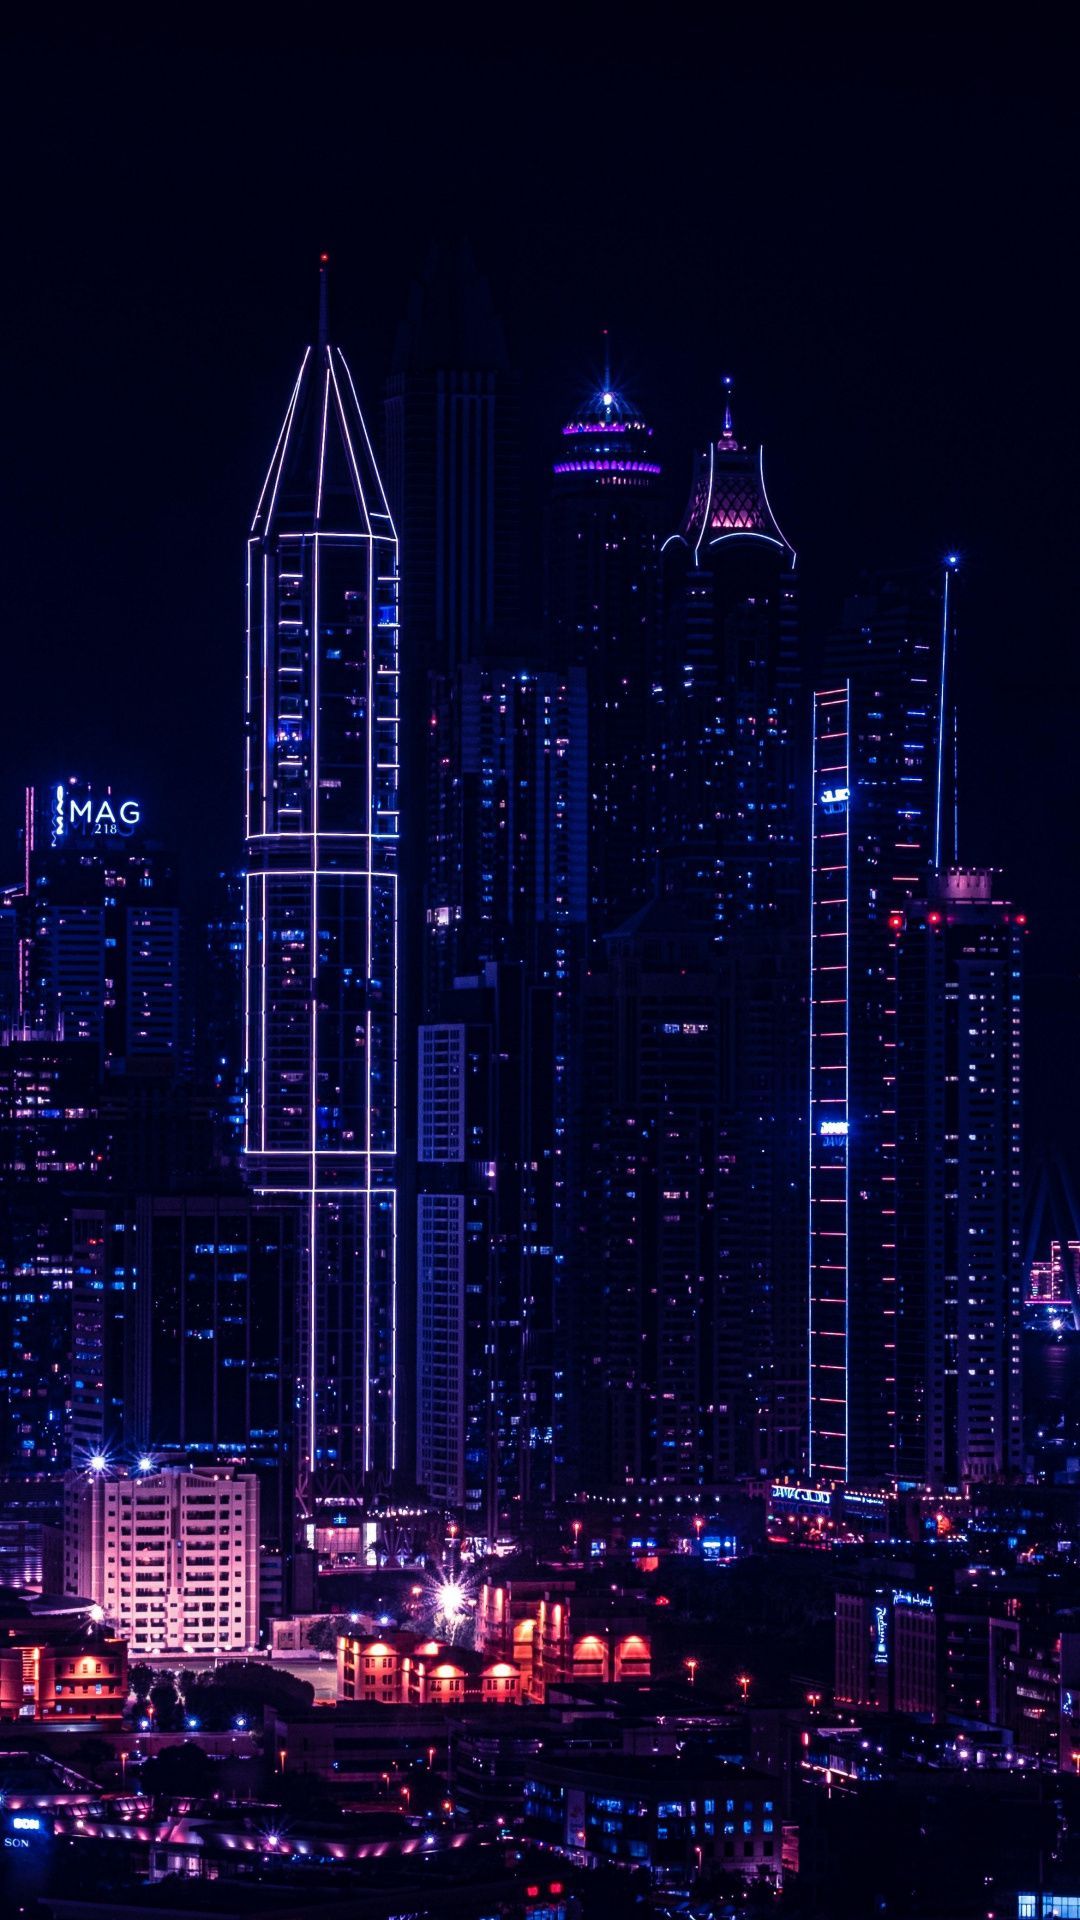 City, night, lights of buildings, cityscape wallpaper. Cityscape wallpaper, City wallpaper, City aesthetic